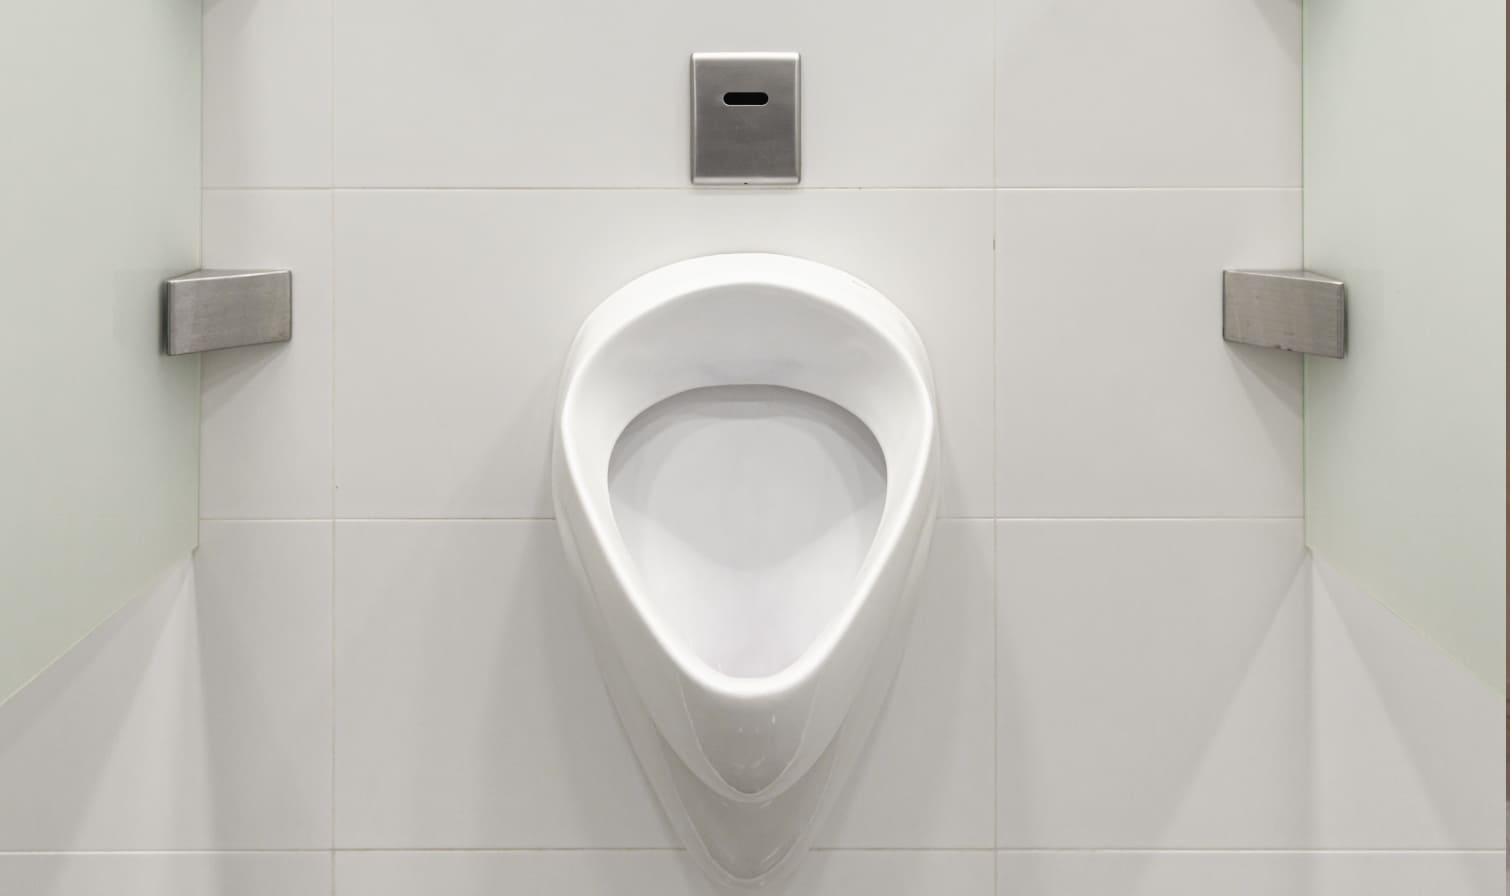 install a urinal at home